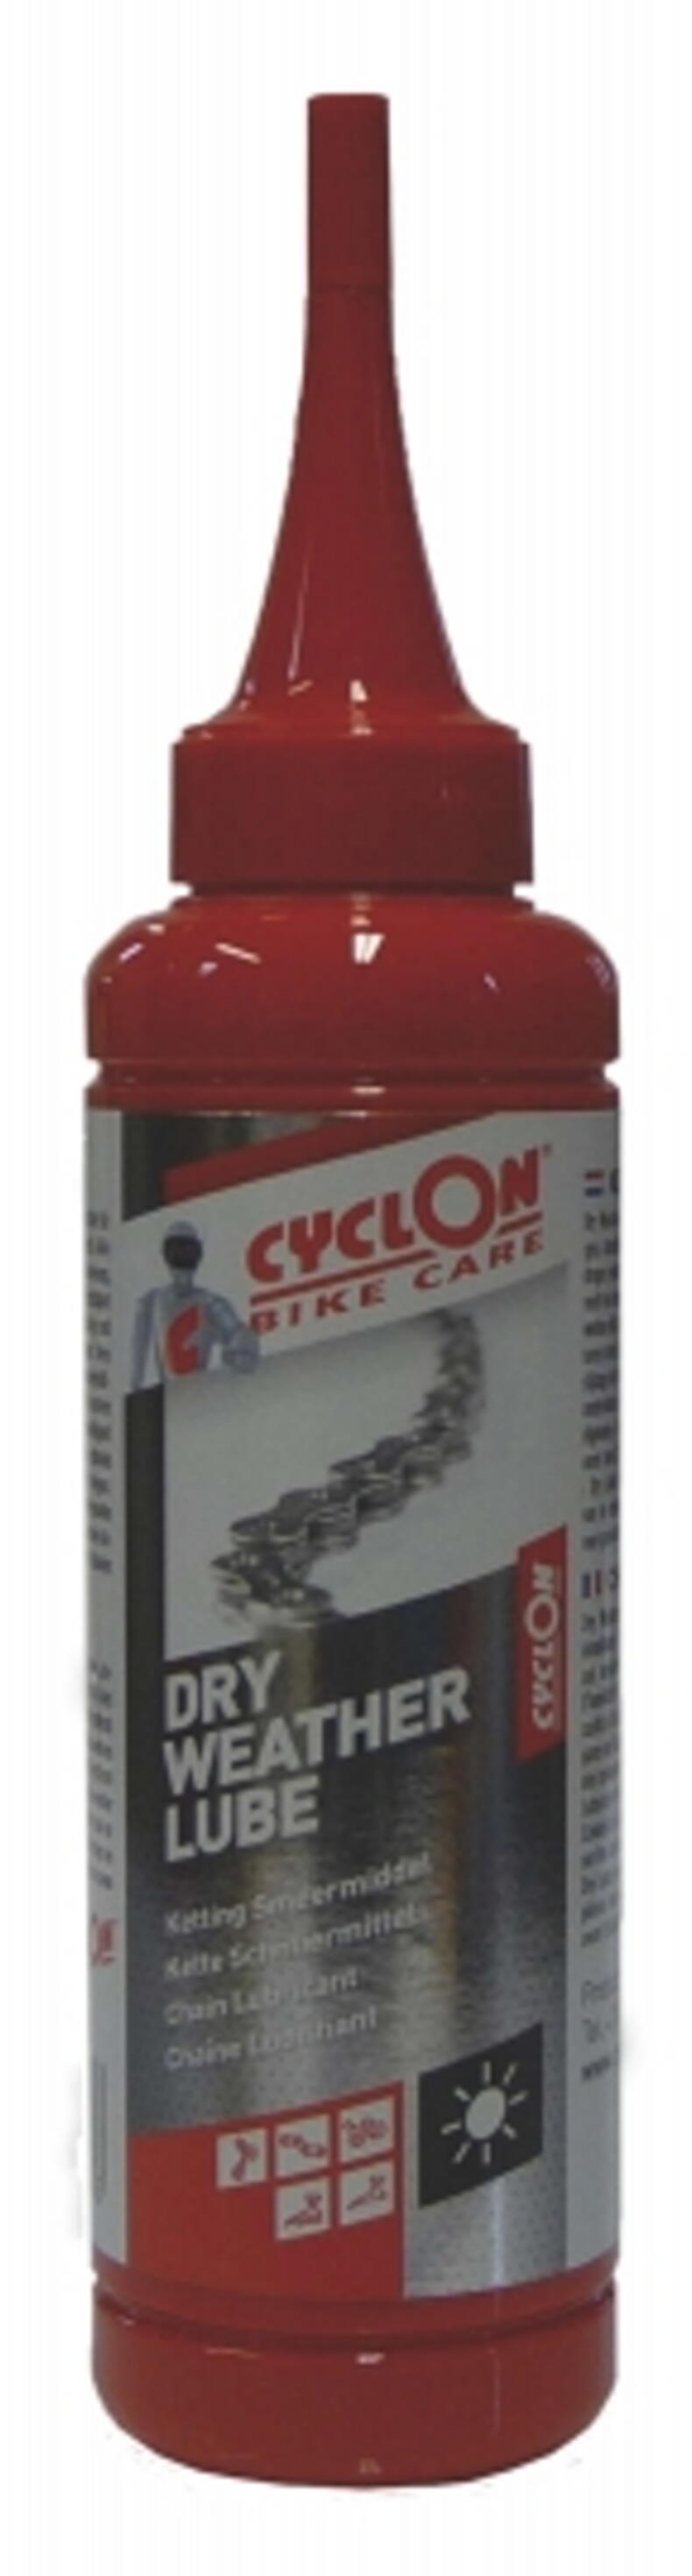 Cyclon Course Dry Weather Lube 125ml